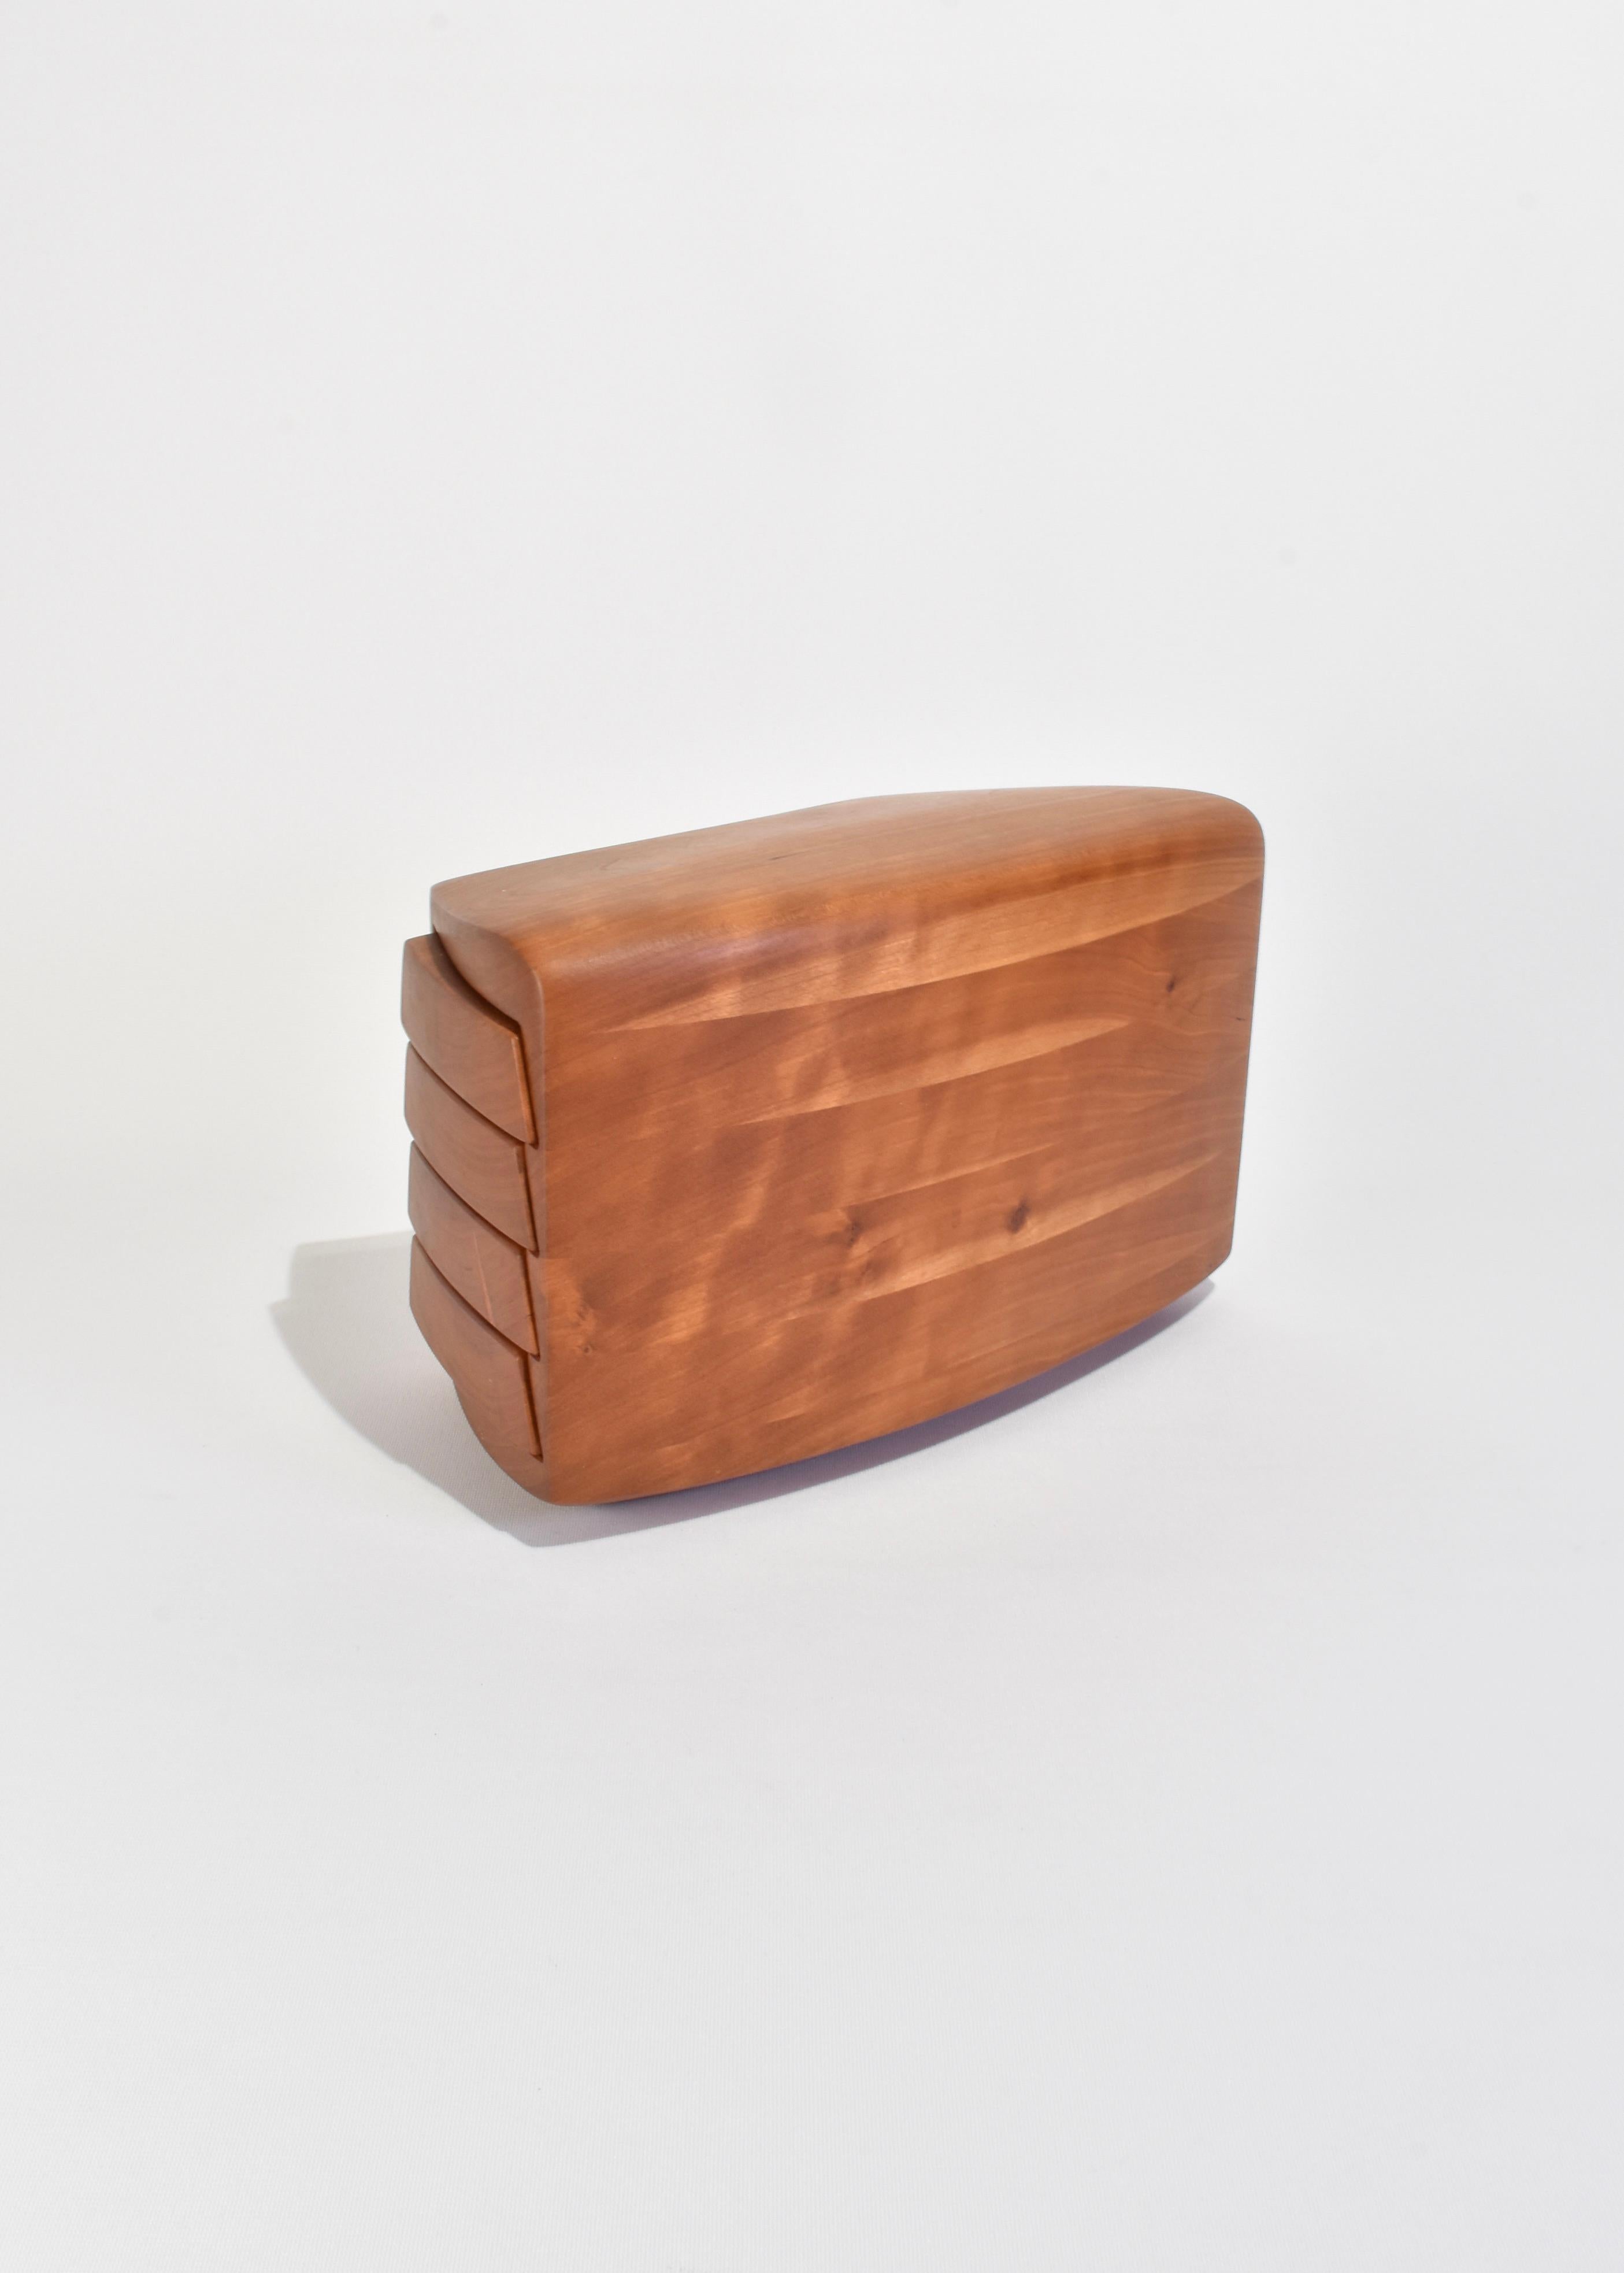 Stunning, sculptural wooden jewelry box with four sliding drawers lined in grey suede. Signed on base, Kellam '90.